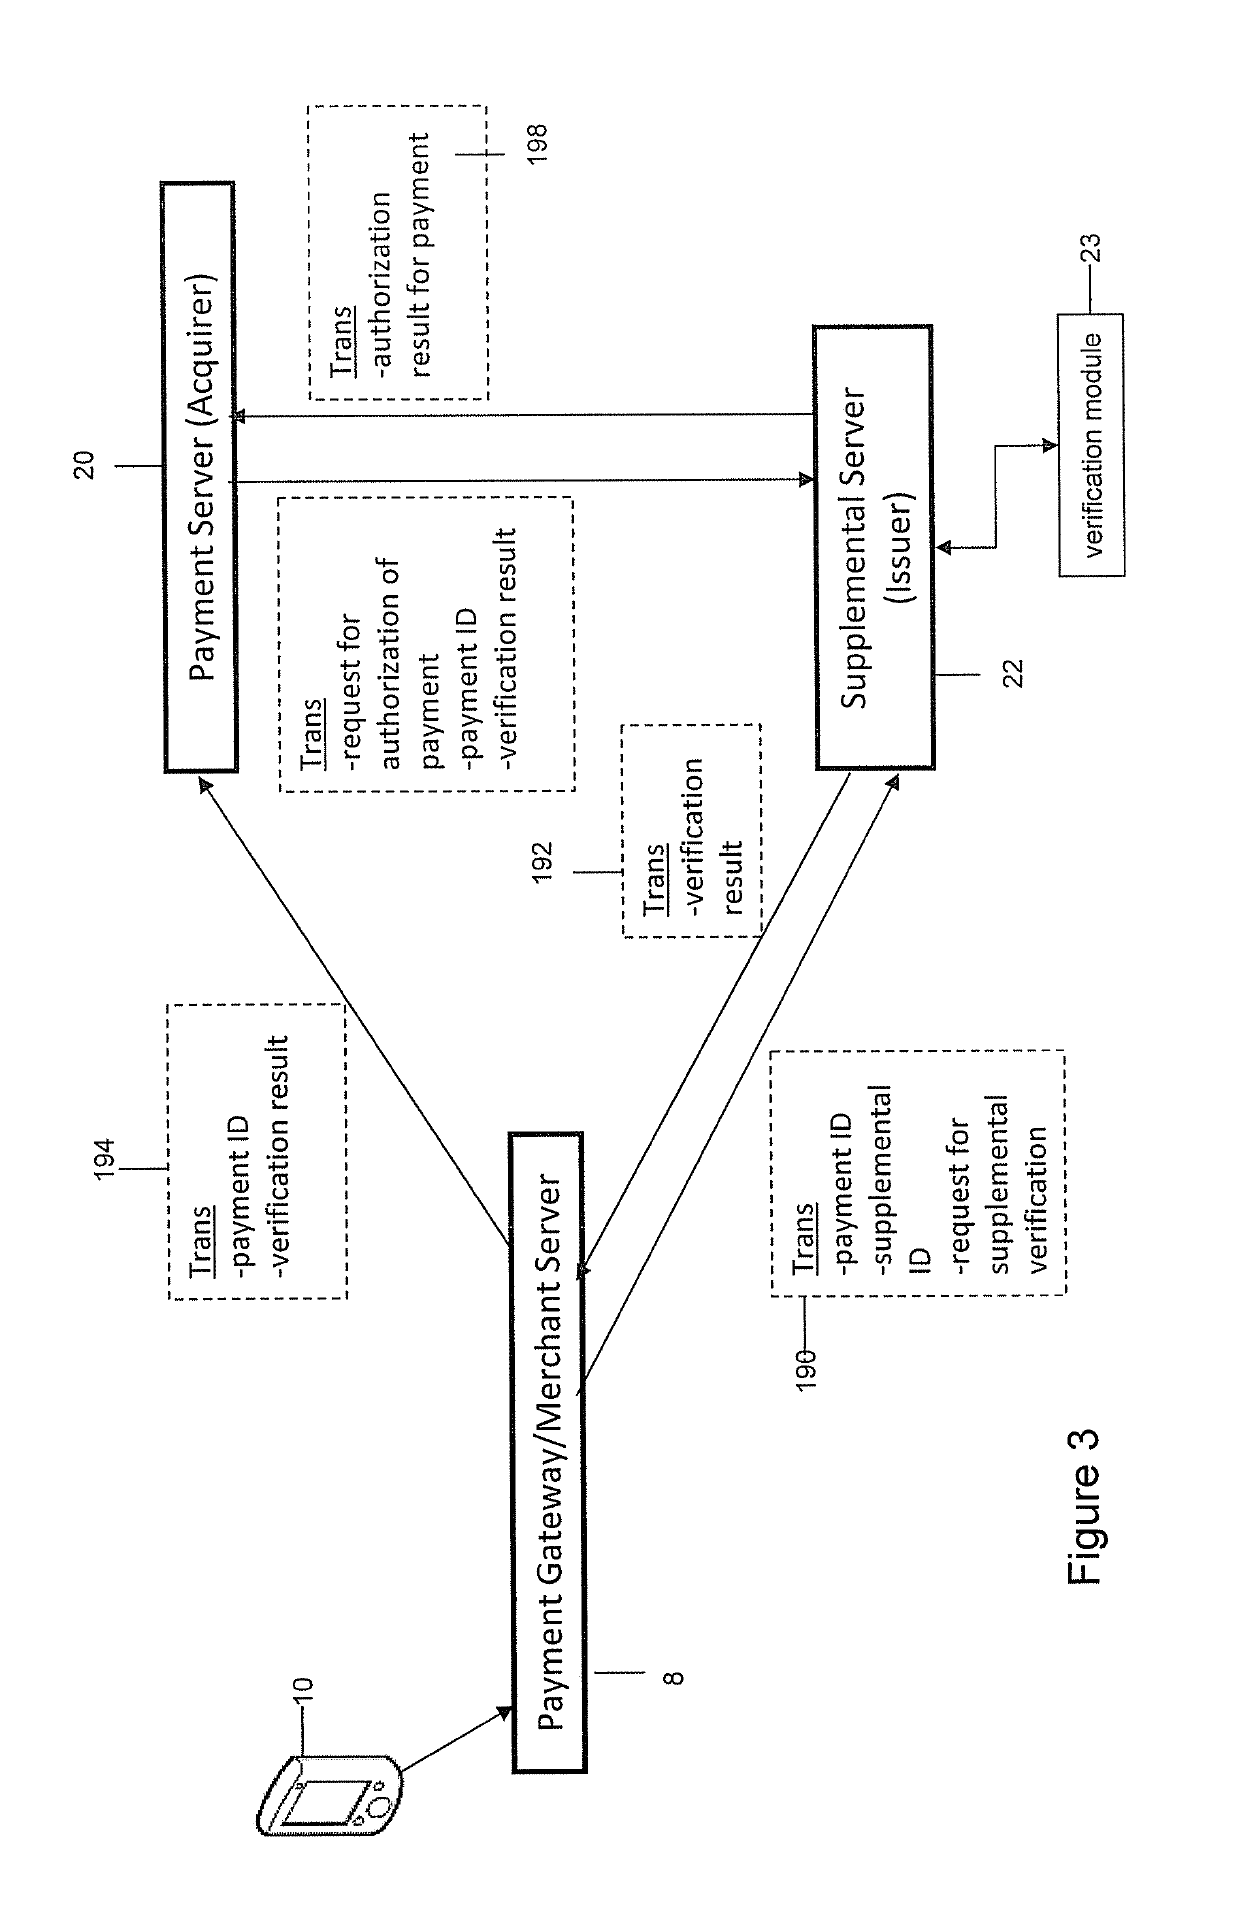 System and method for secured communications between a mobile device and a server